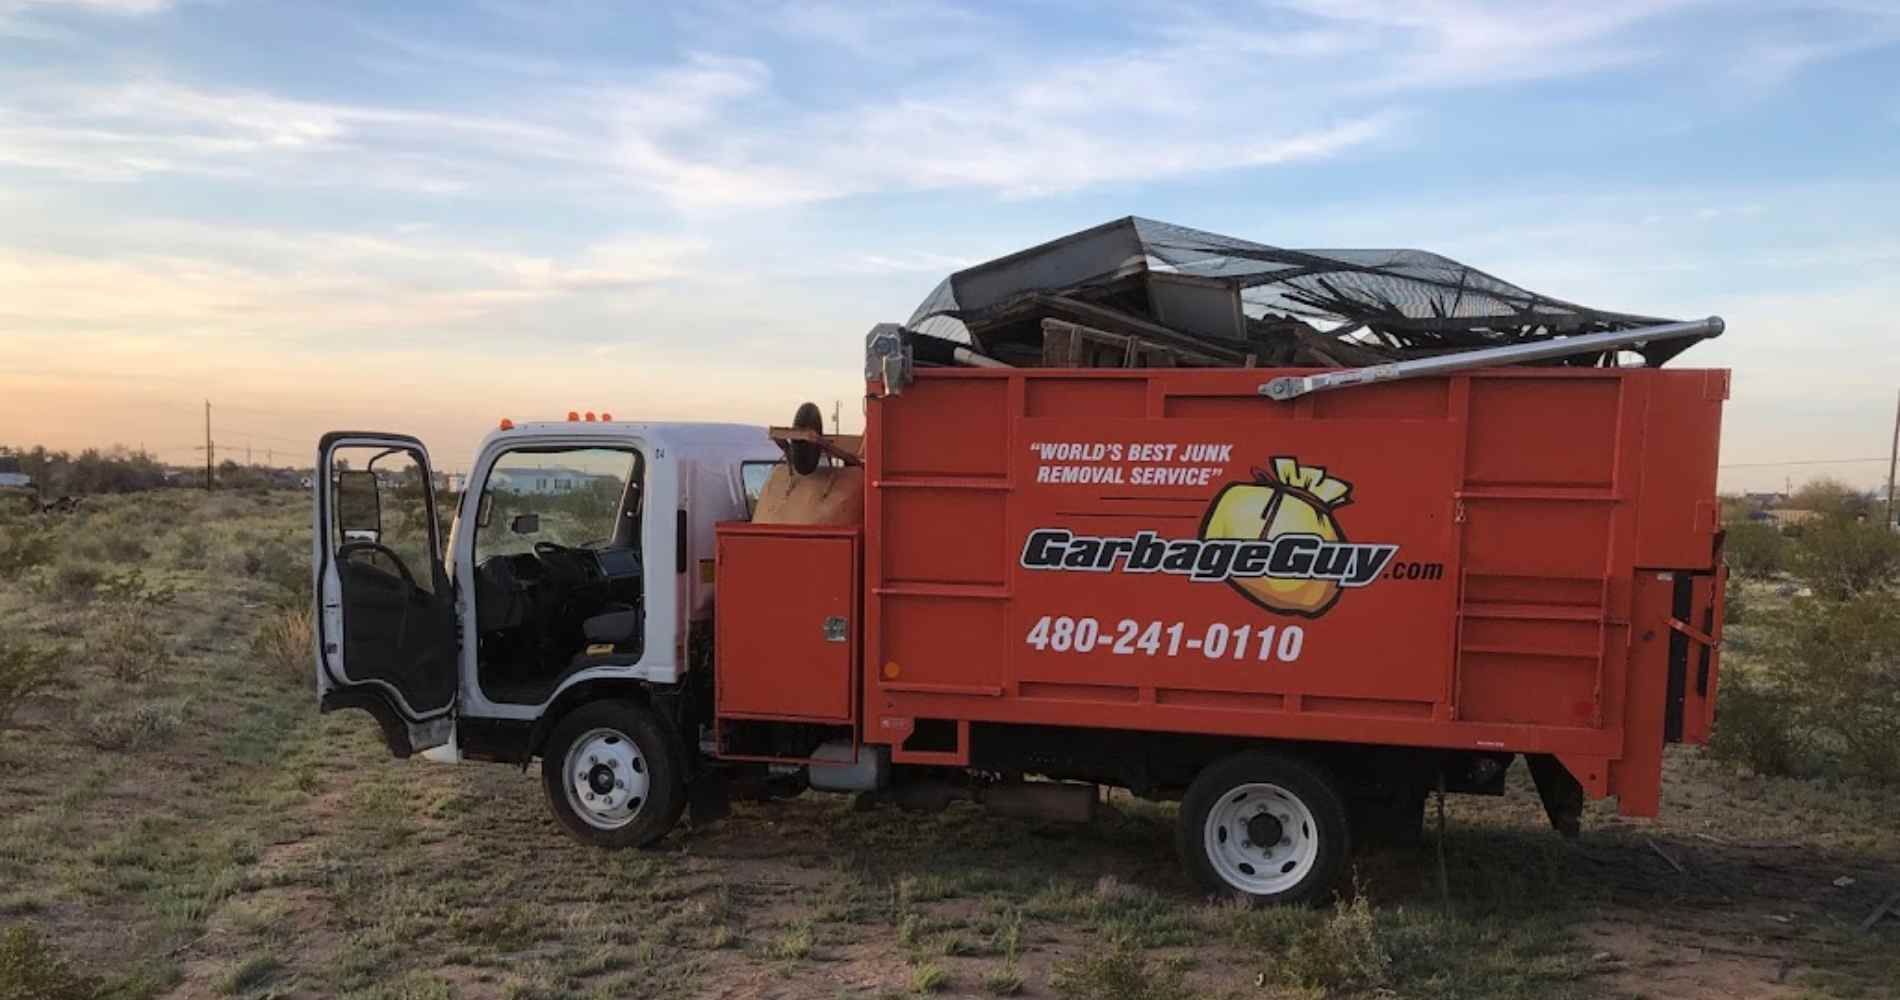 #1 for Junk Removal in Surprise, AZ with Over 1200 5-Star Reviews!